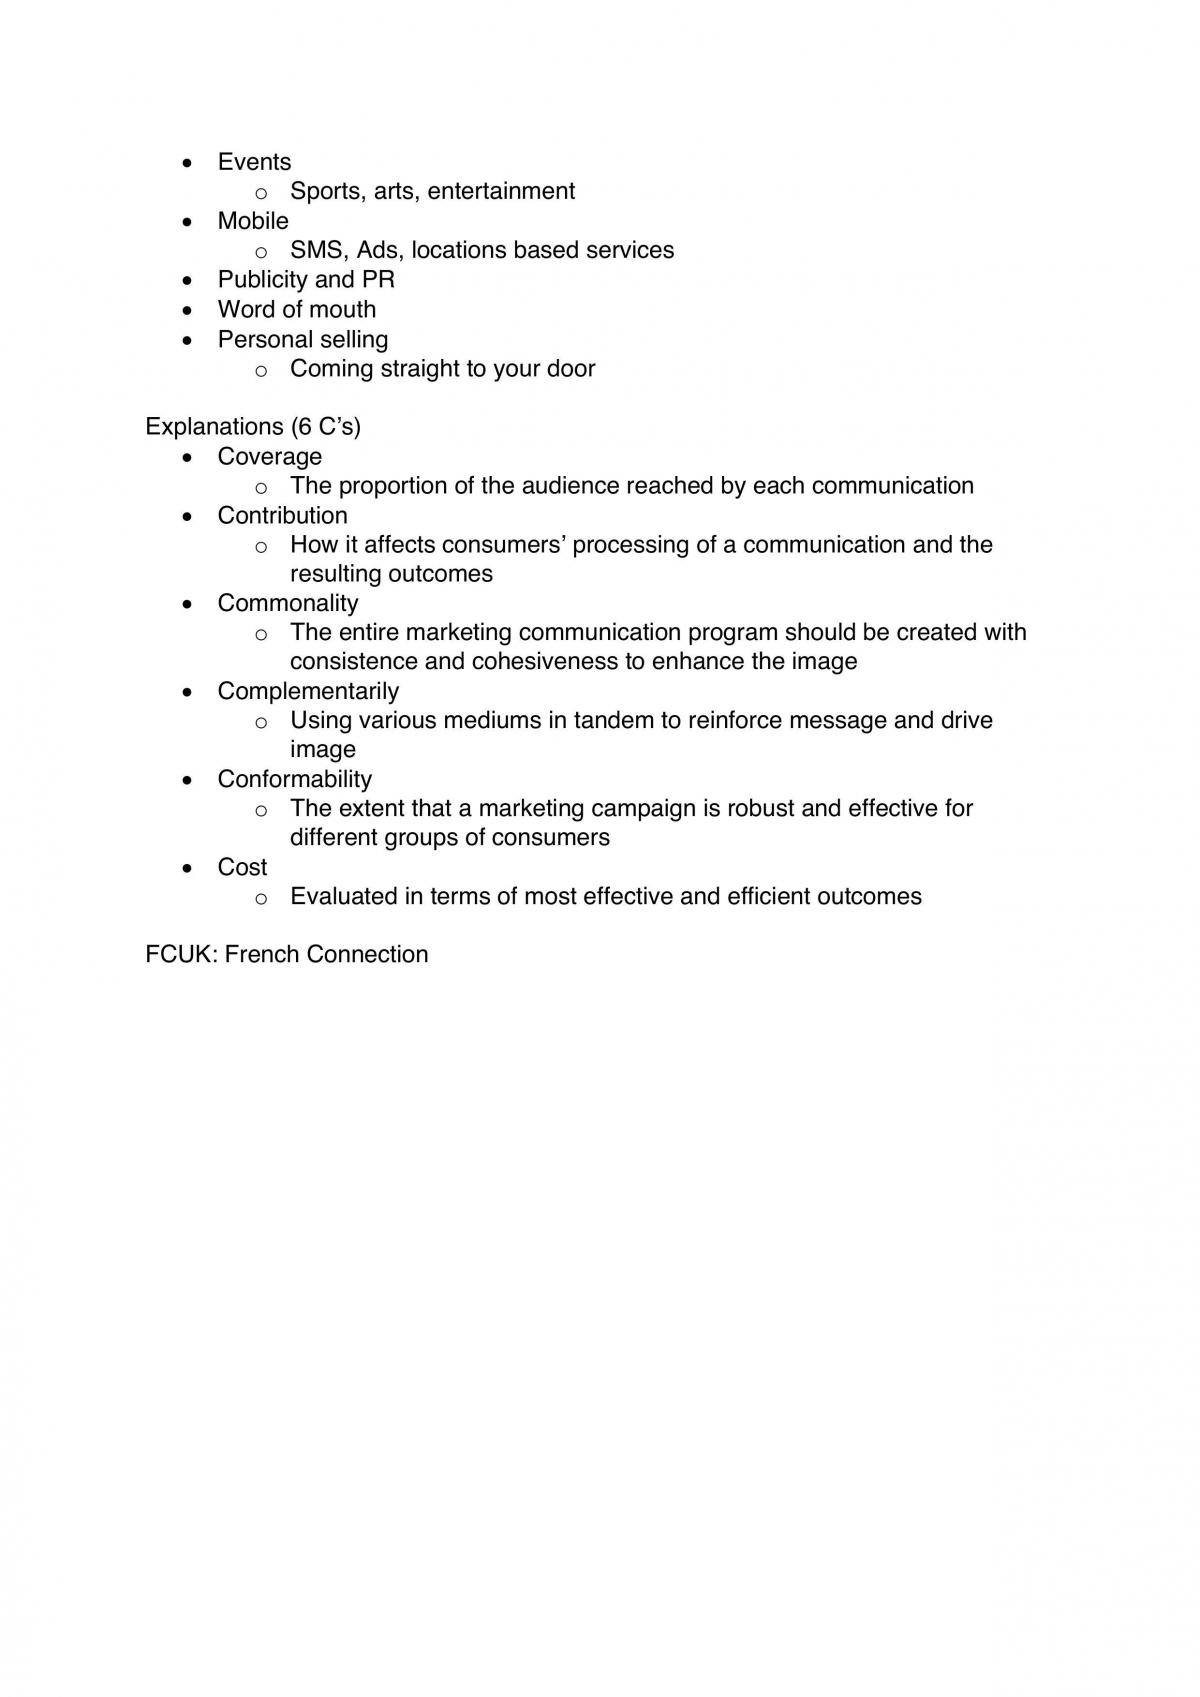 MKTG20006 Tutorial Notes - Page 10